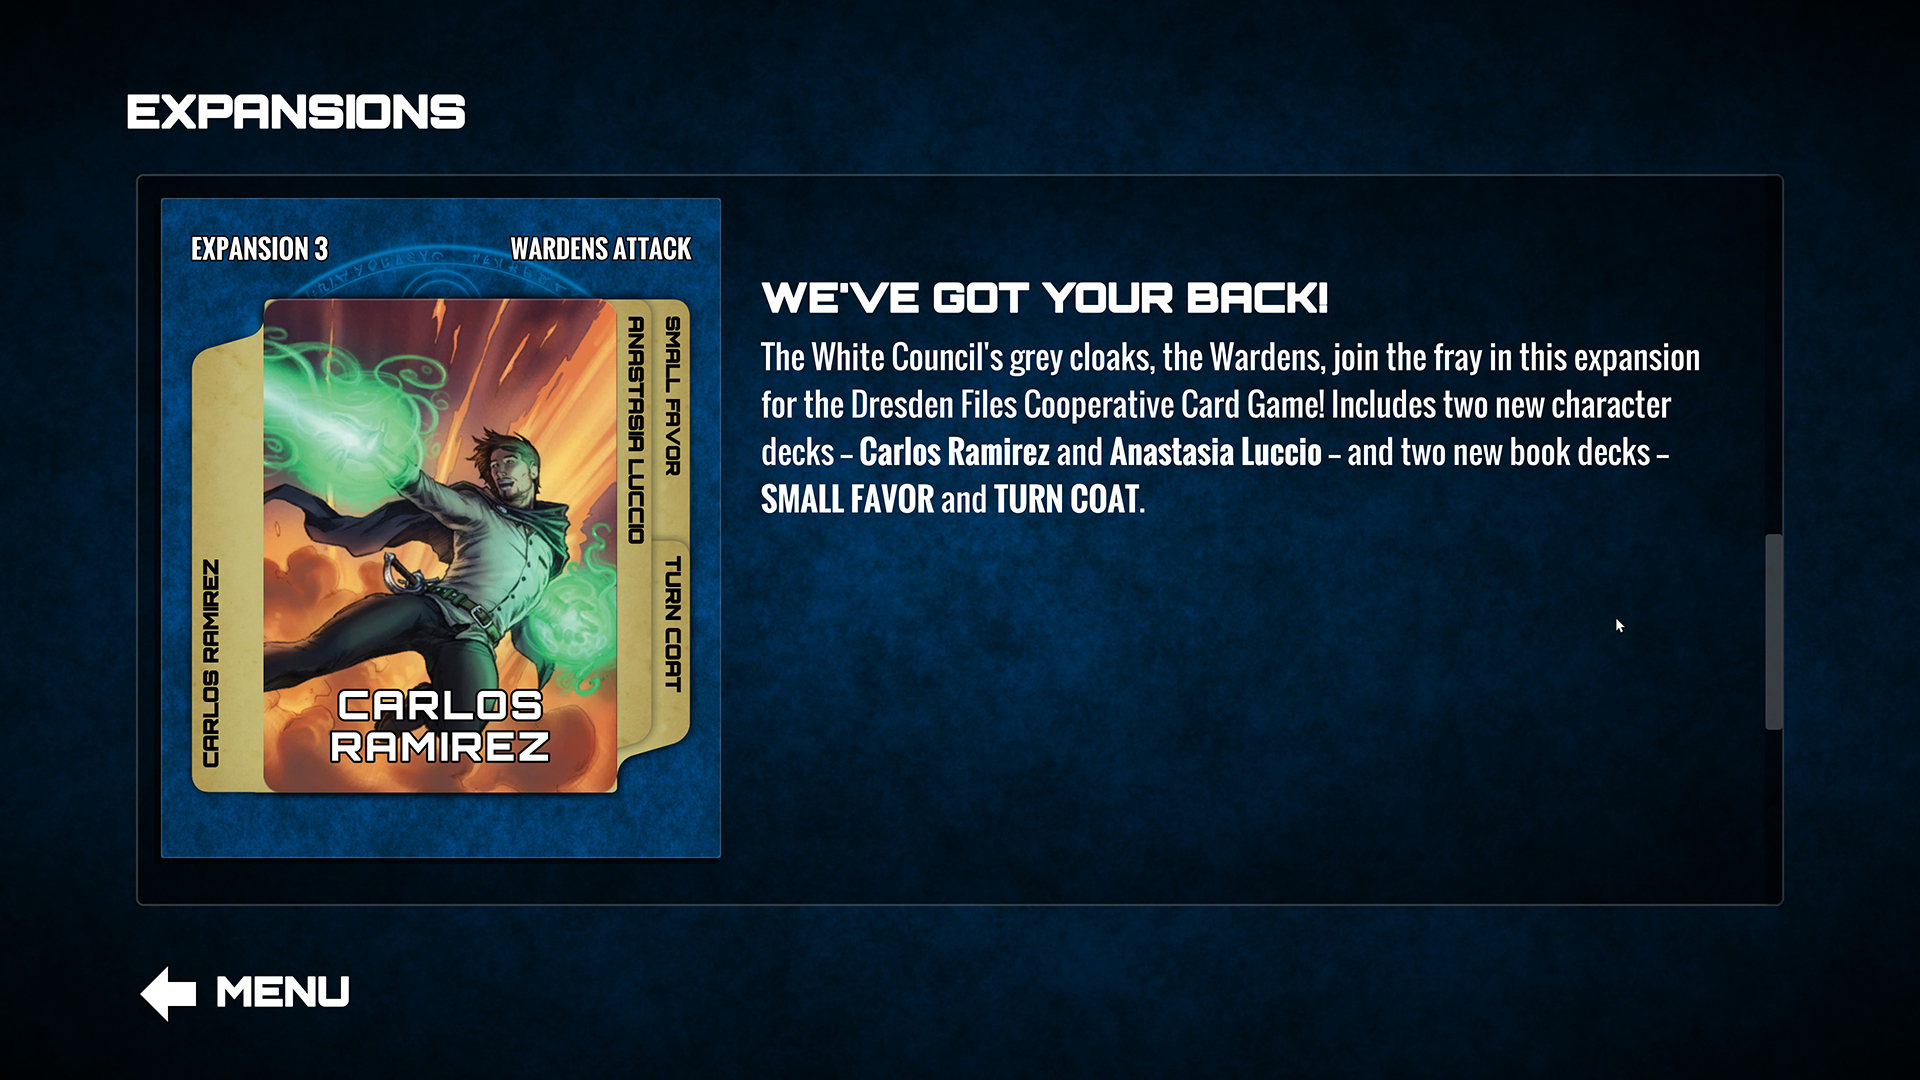 Dresden Files Cooperative Card Game - Wardens Attack Featured Screenshot #1